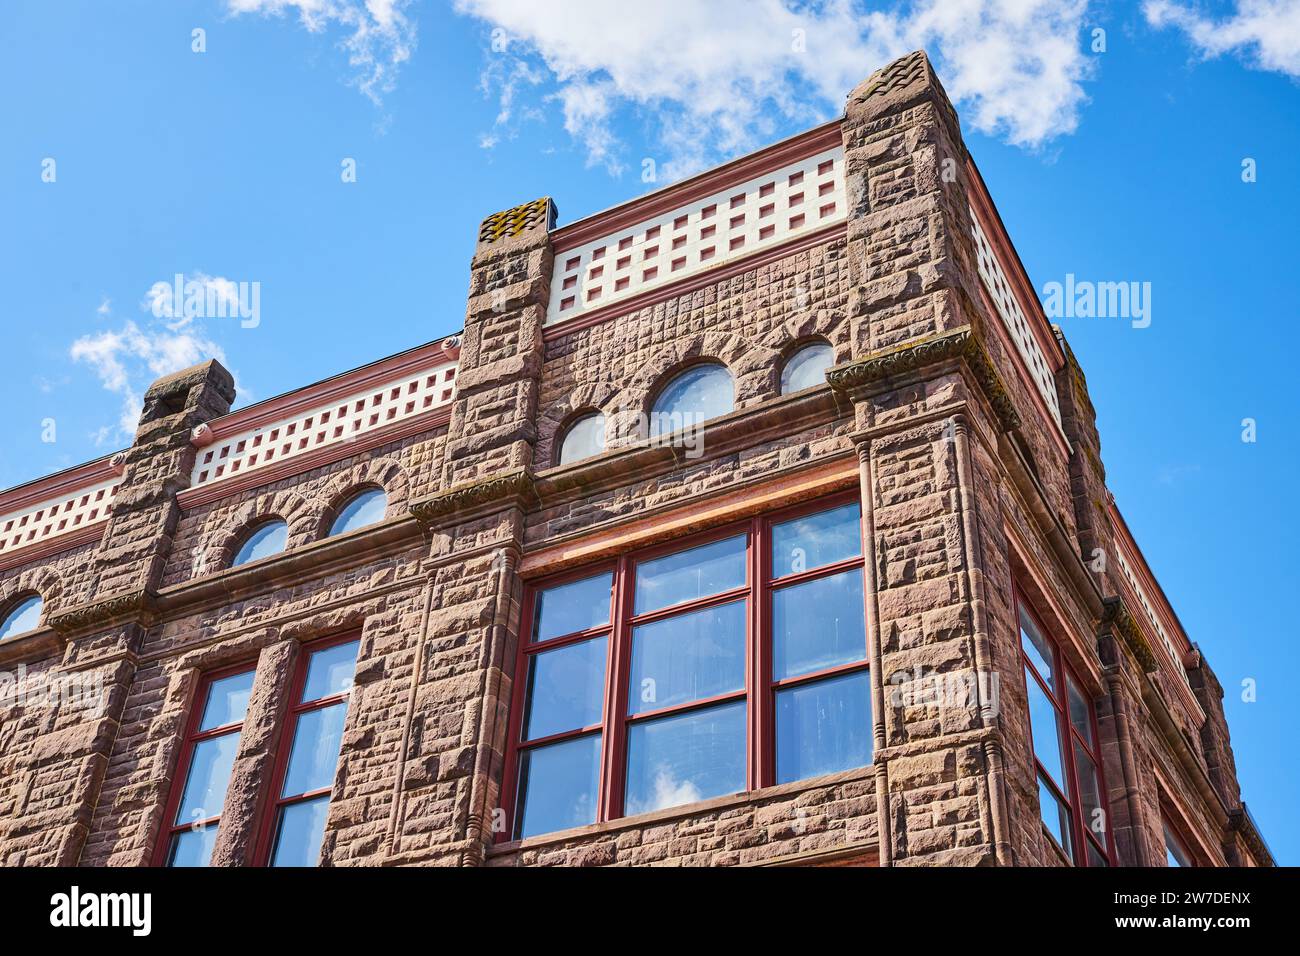 Majestic Vintage Stone Building with Arched Windows and Battlements, Low Angle Stock Photo